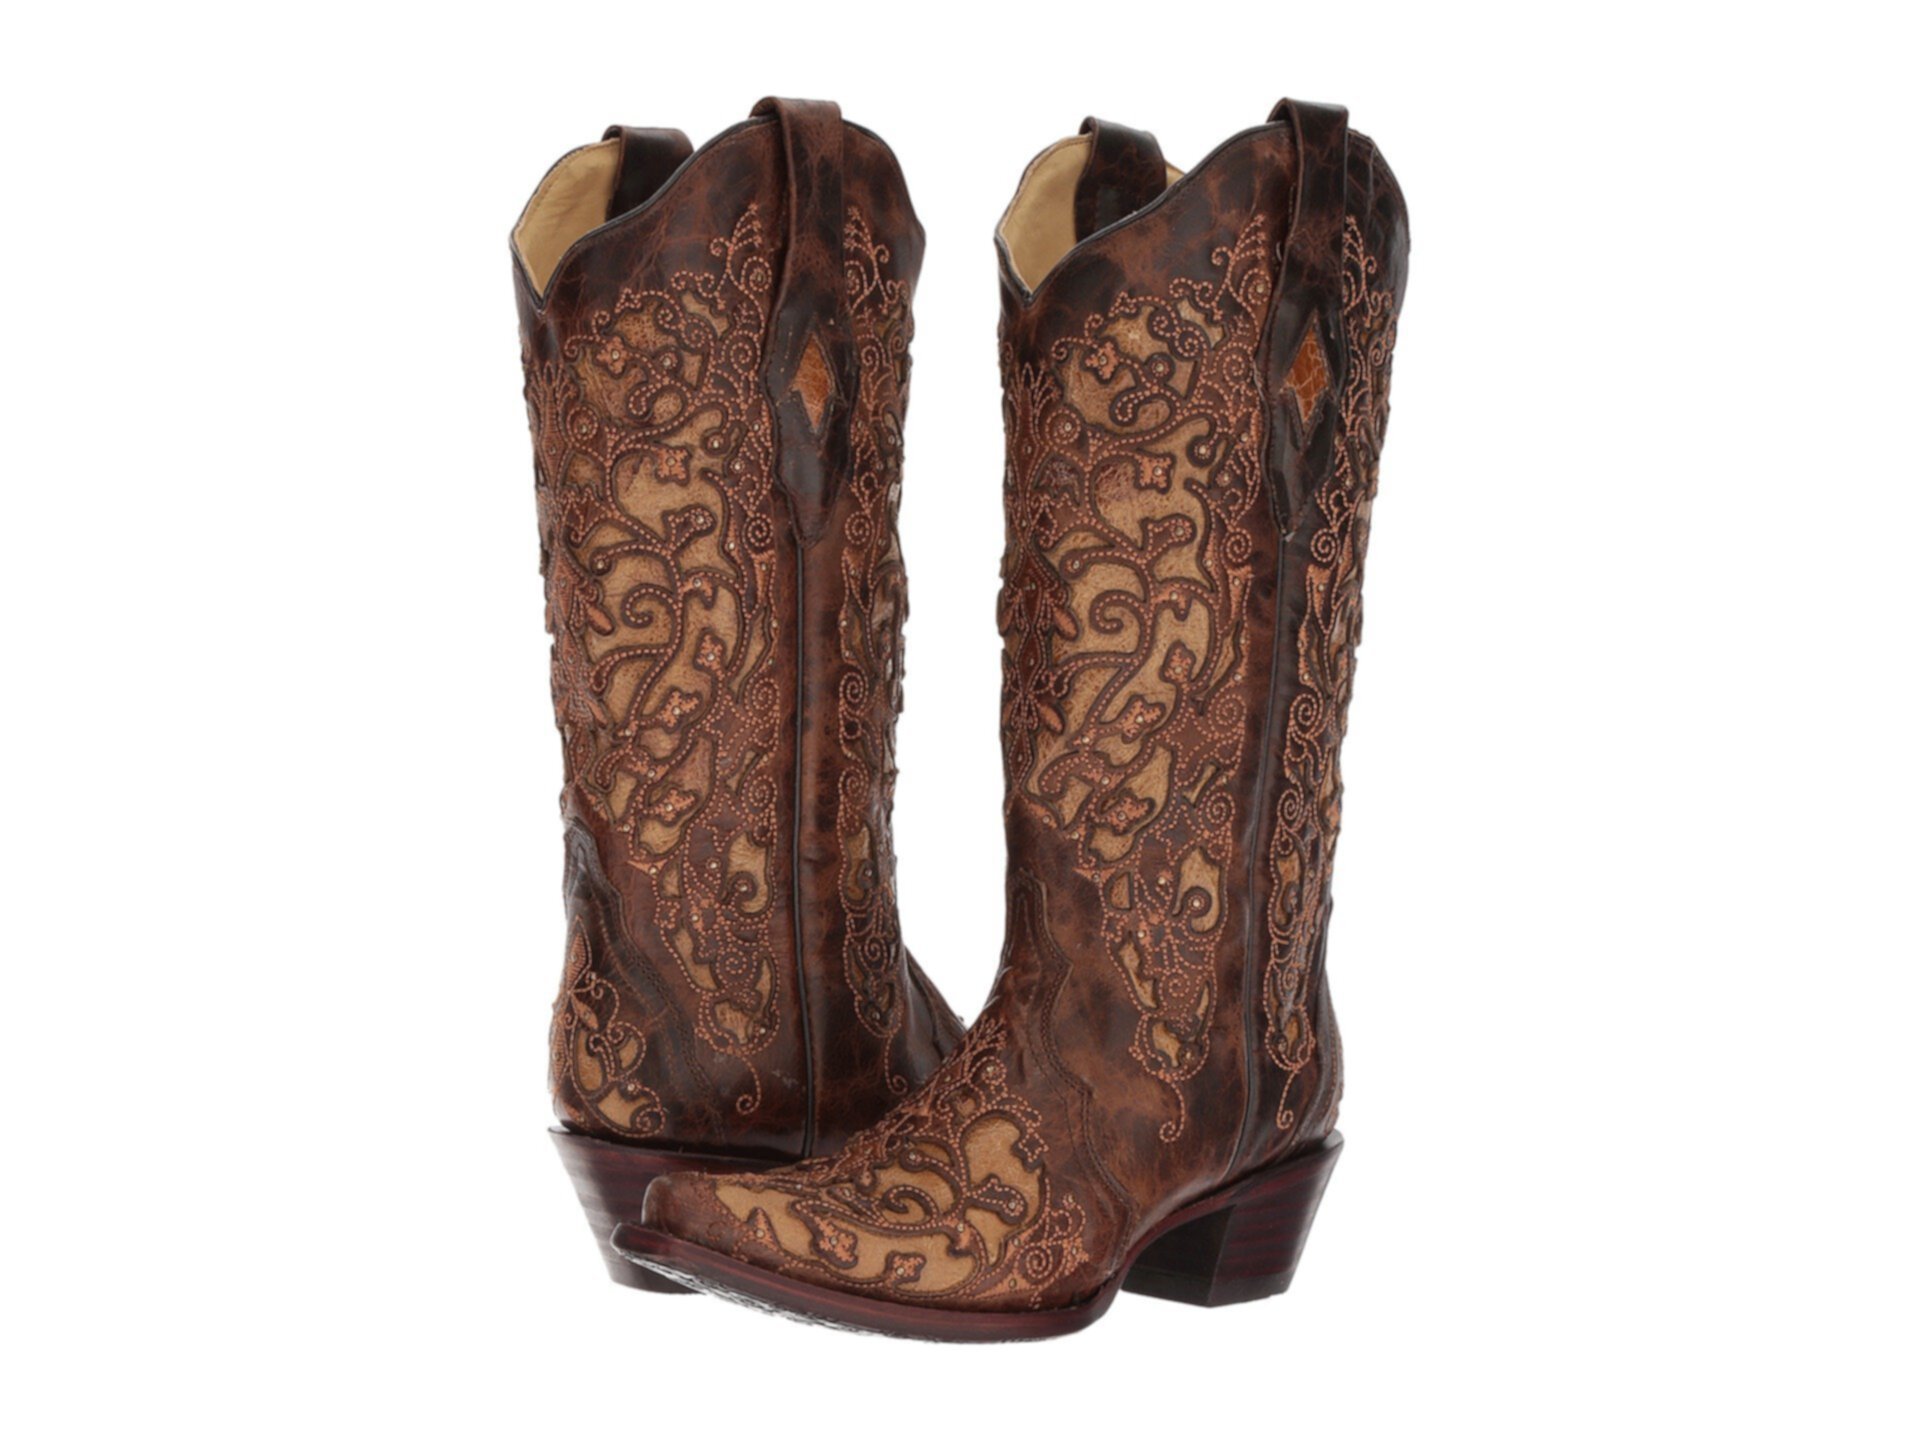 A3319 Corral Boots